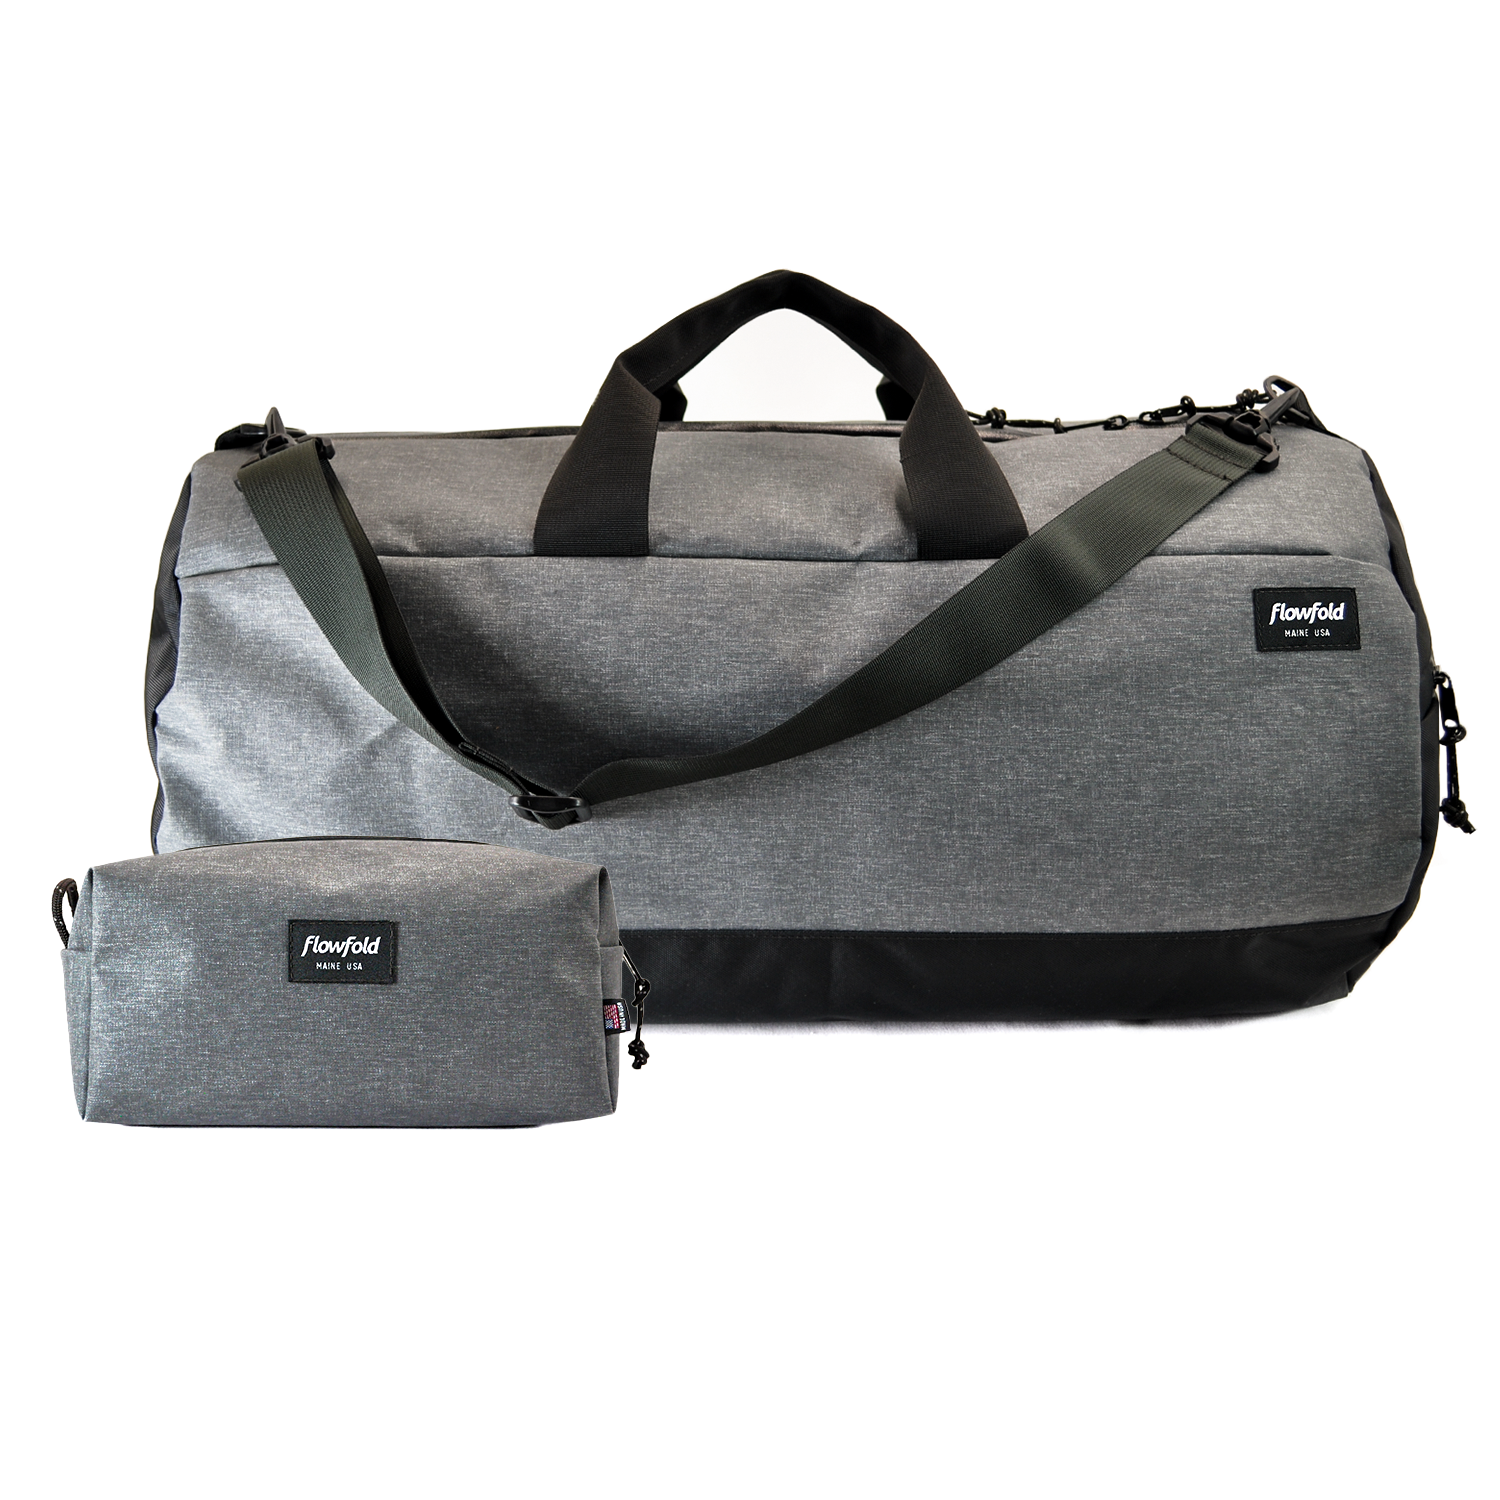 Flowfold Bar Harbor Kit: Stormproof Conductor Duffle bag + Dopp Kit for travel and road trips, Heather Grey